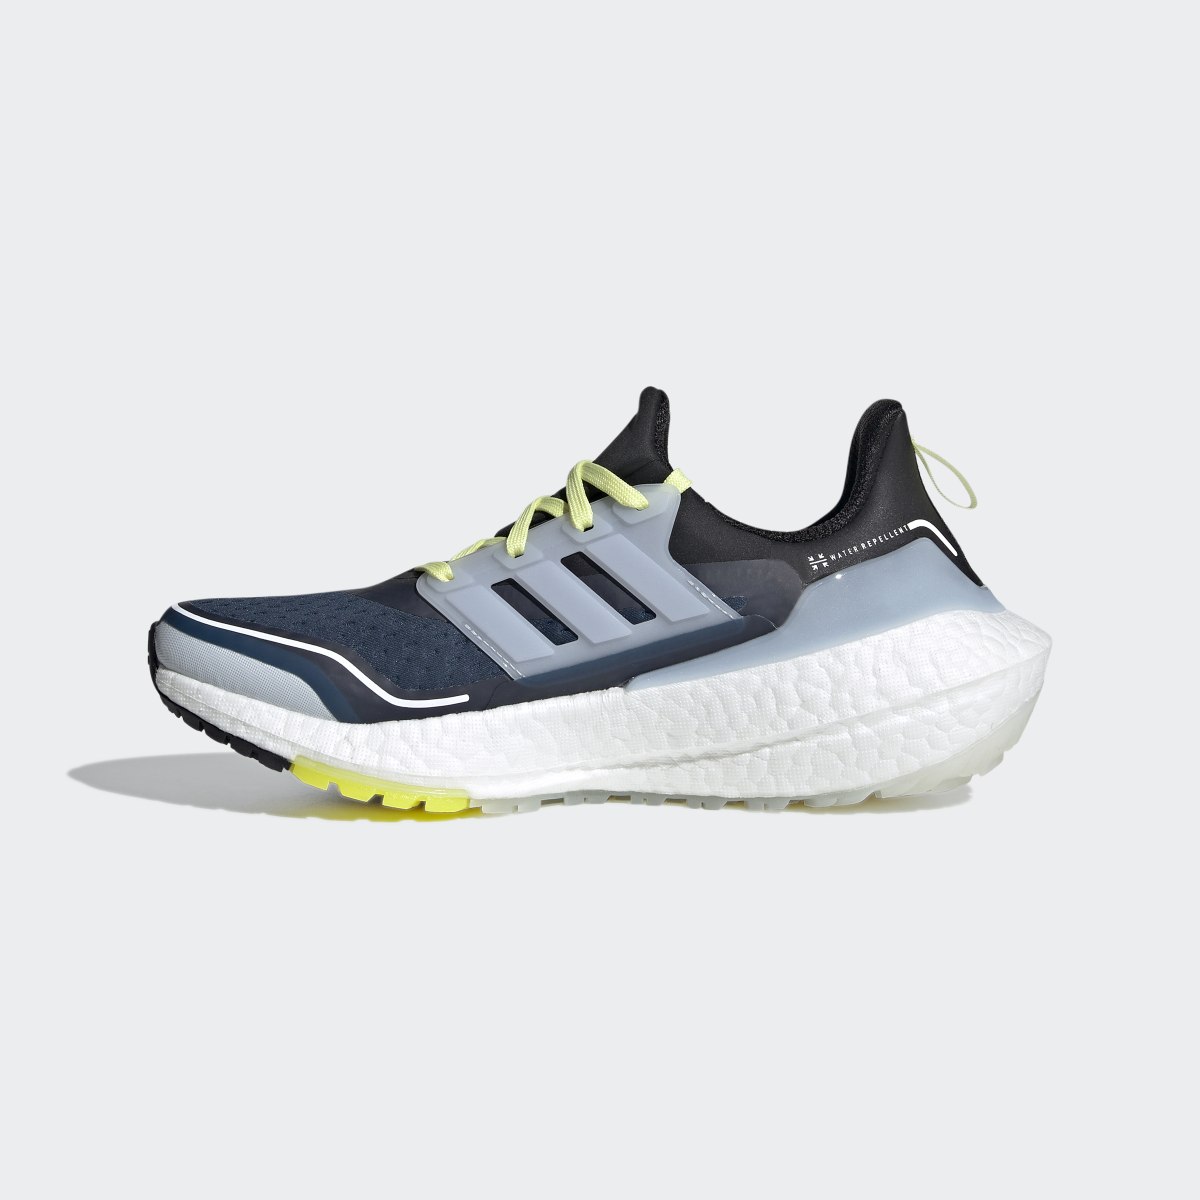 Adidas Ultraboost 21 COLD.RDY Shoes. 8